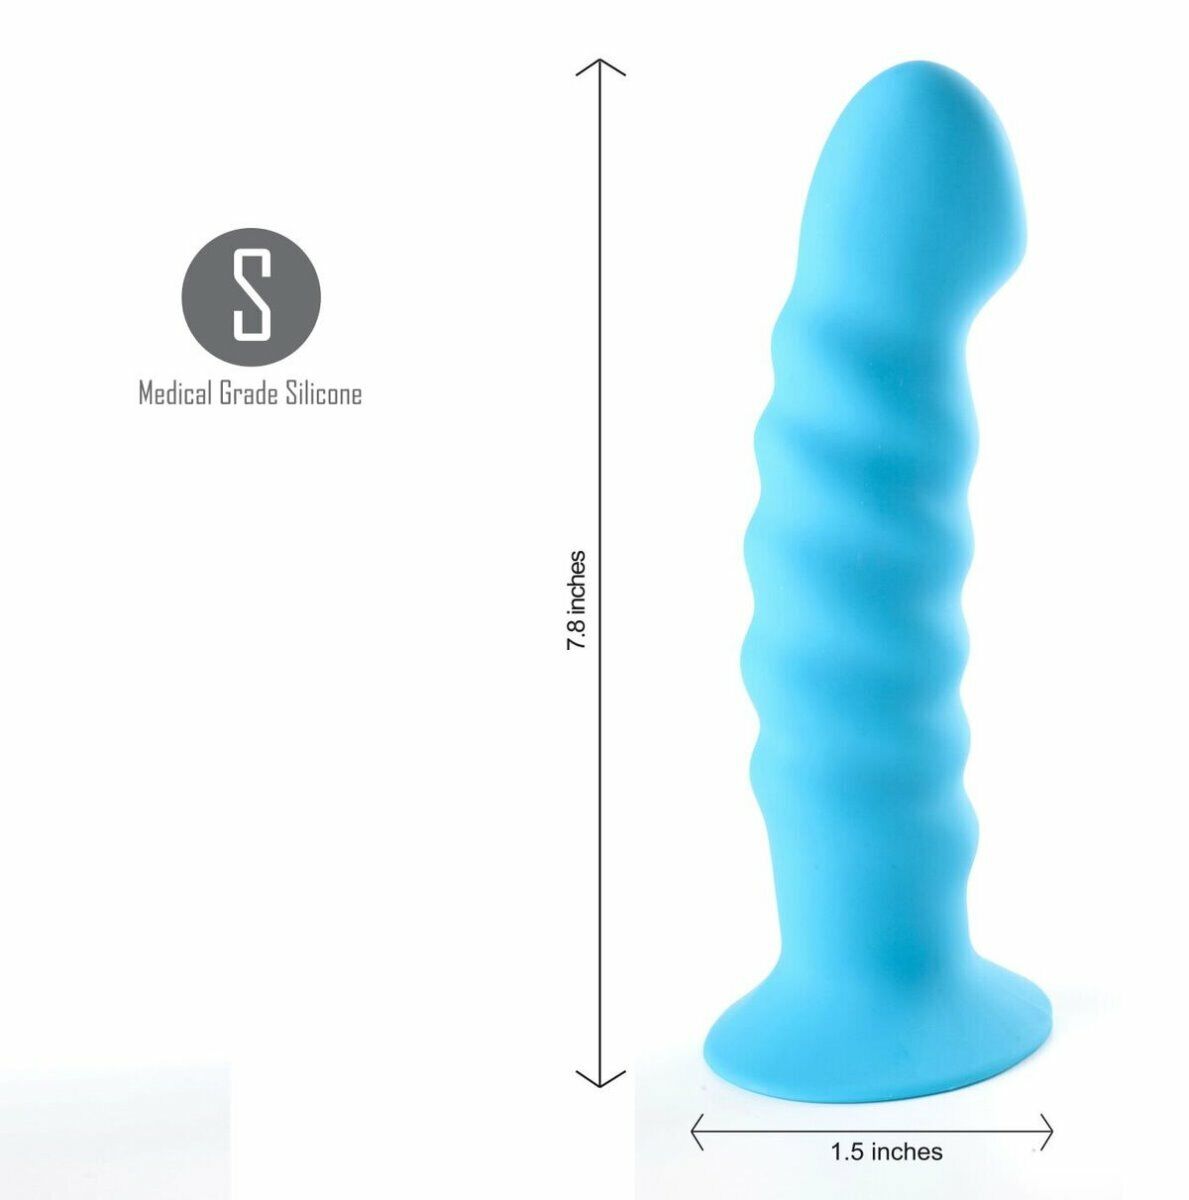 Maia Astral D3 Silicone G-spot Anal Dildo Dildoe Strap-on Dong Attachment